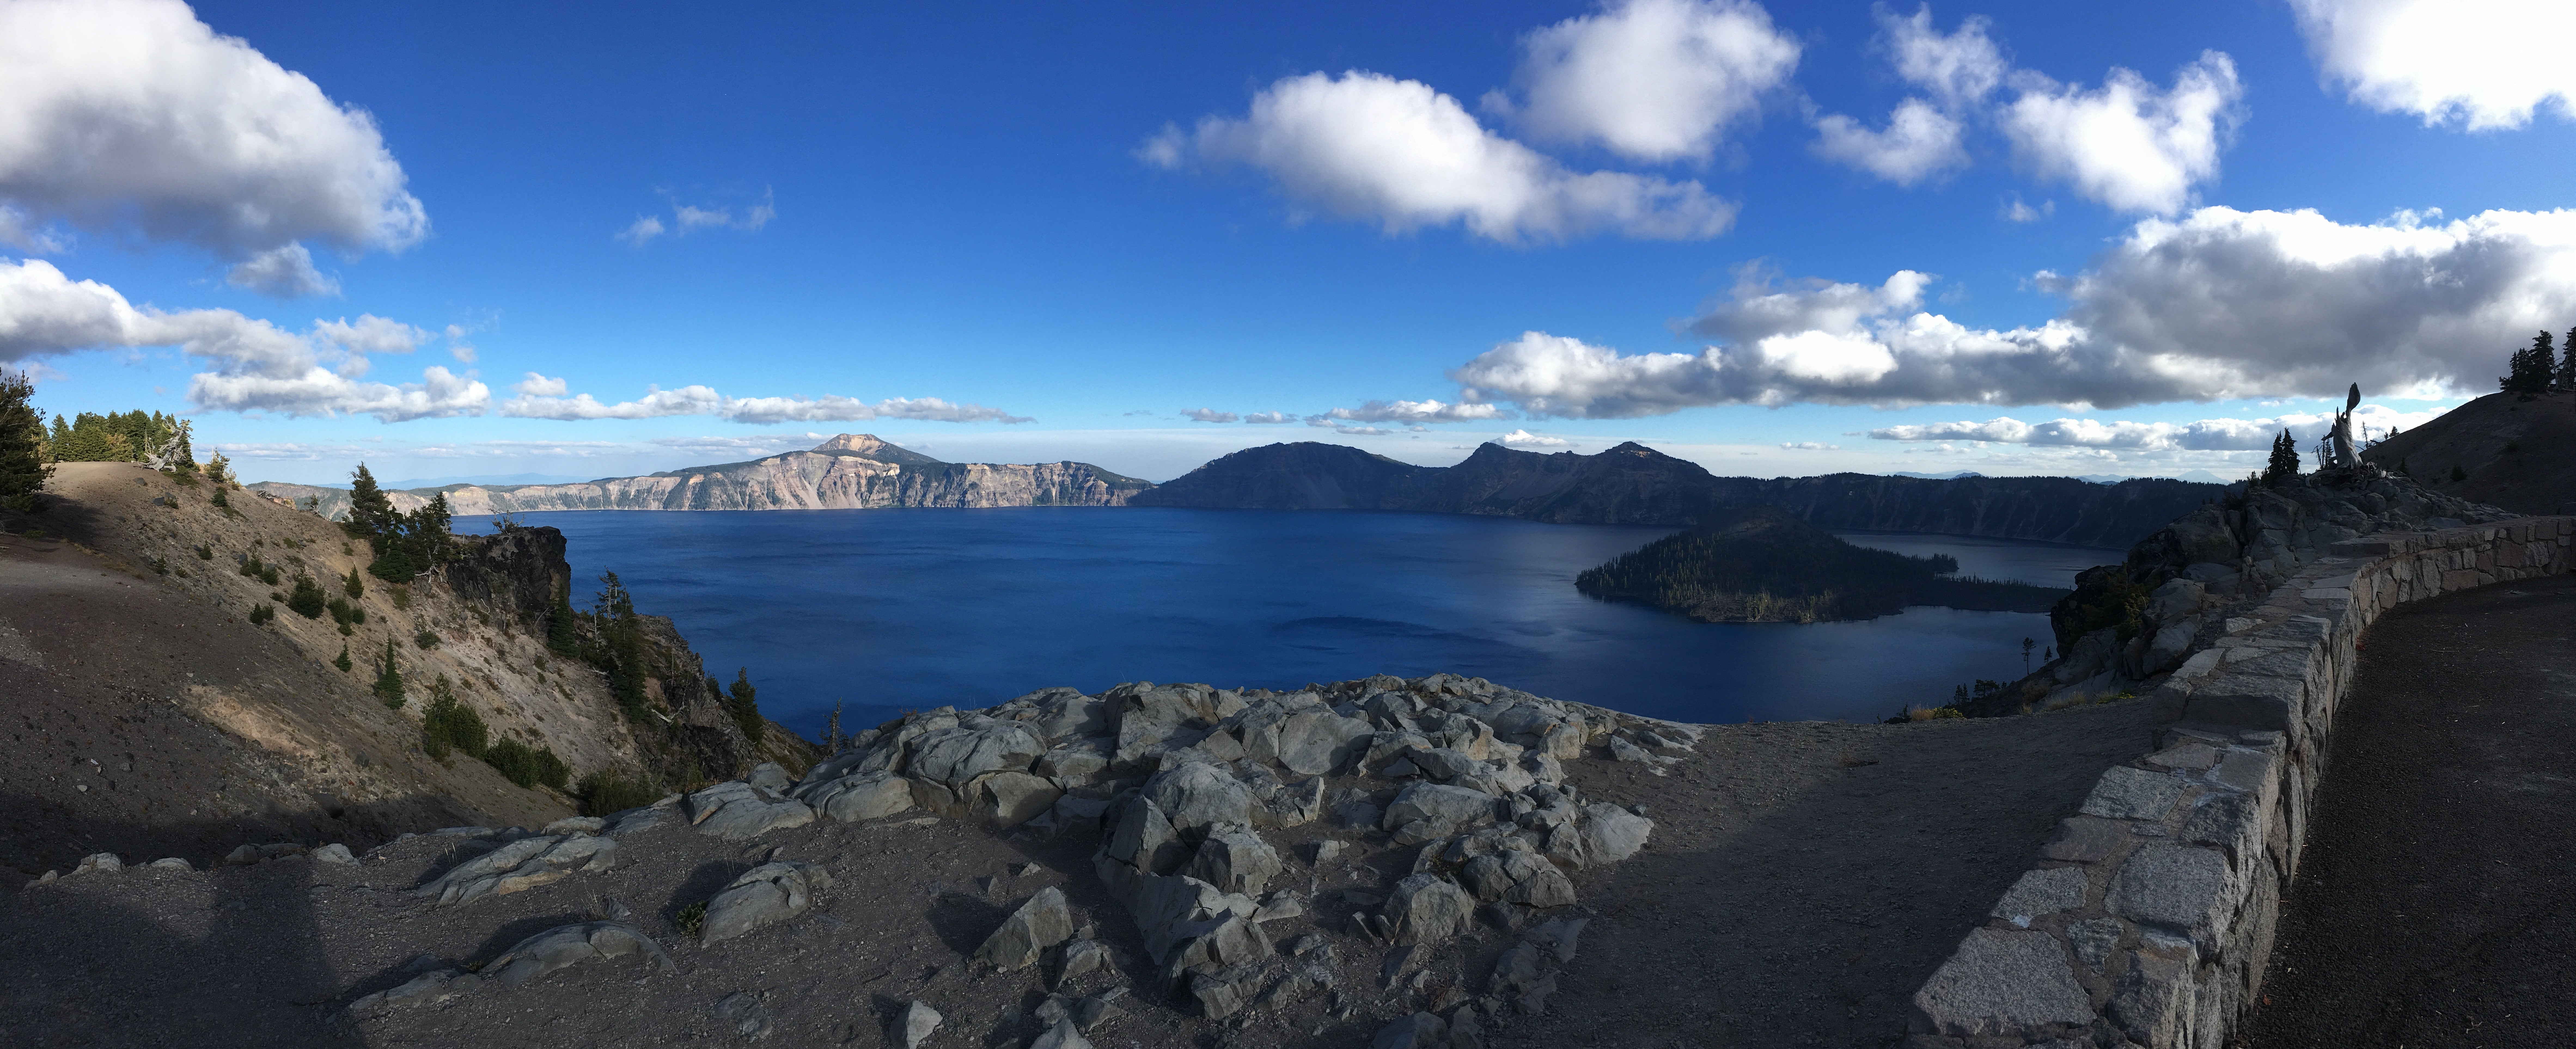 Crater Lake is incredible!